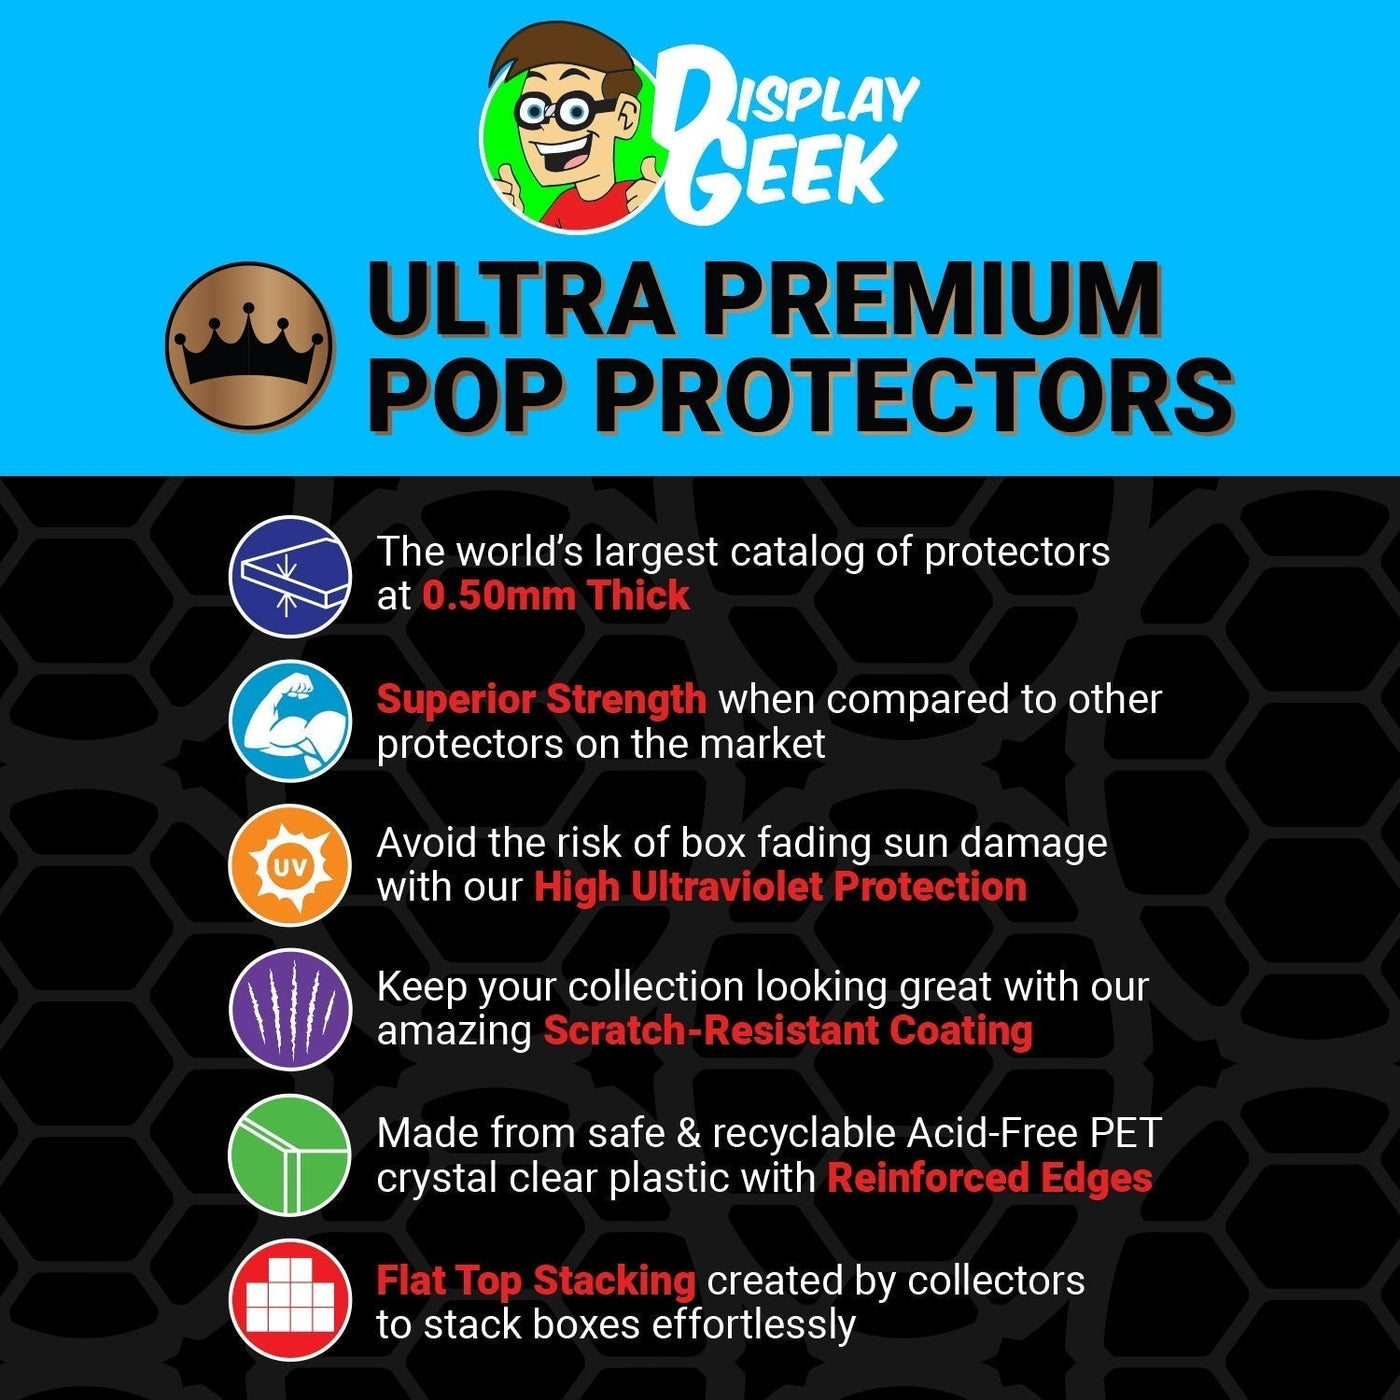 Pop Protector for The Cure Disintegration #65 Funko Pop Albums on The Protector Guide App by Display Geek